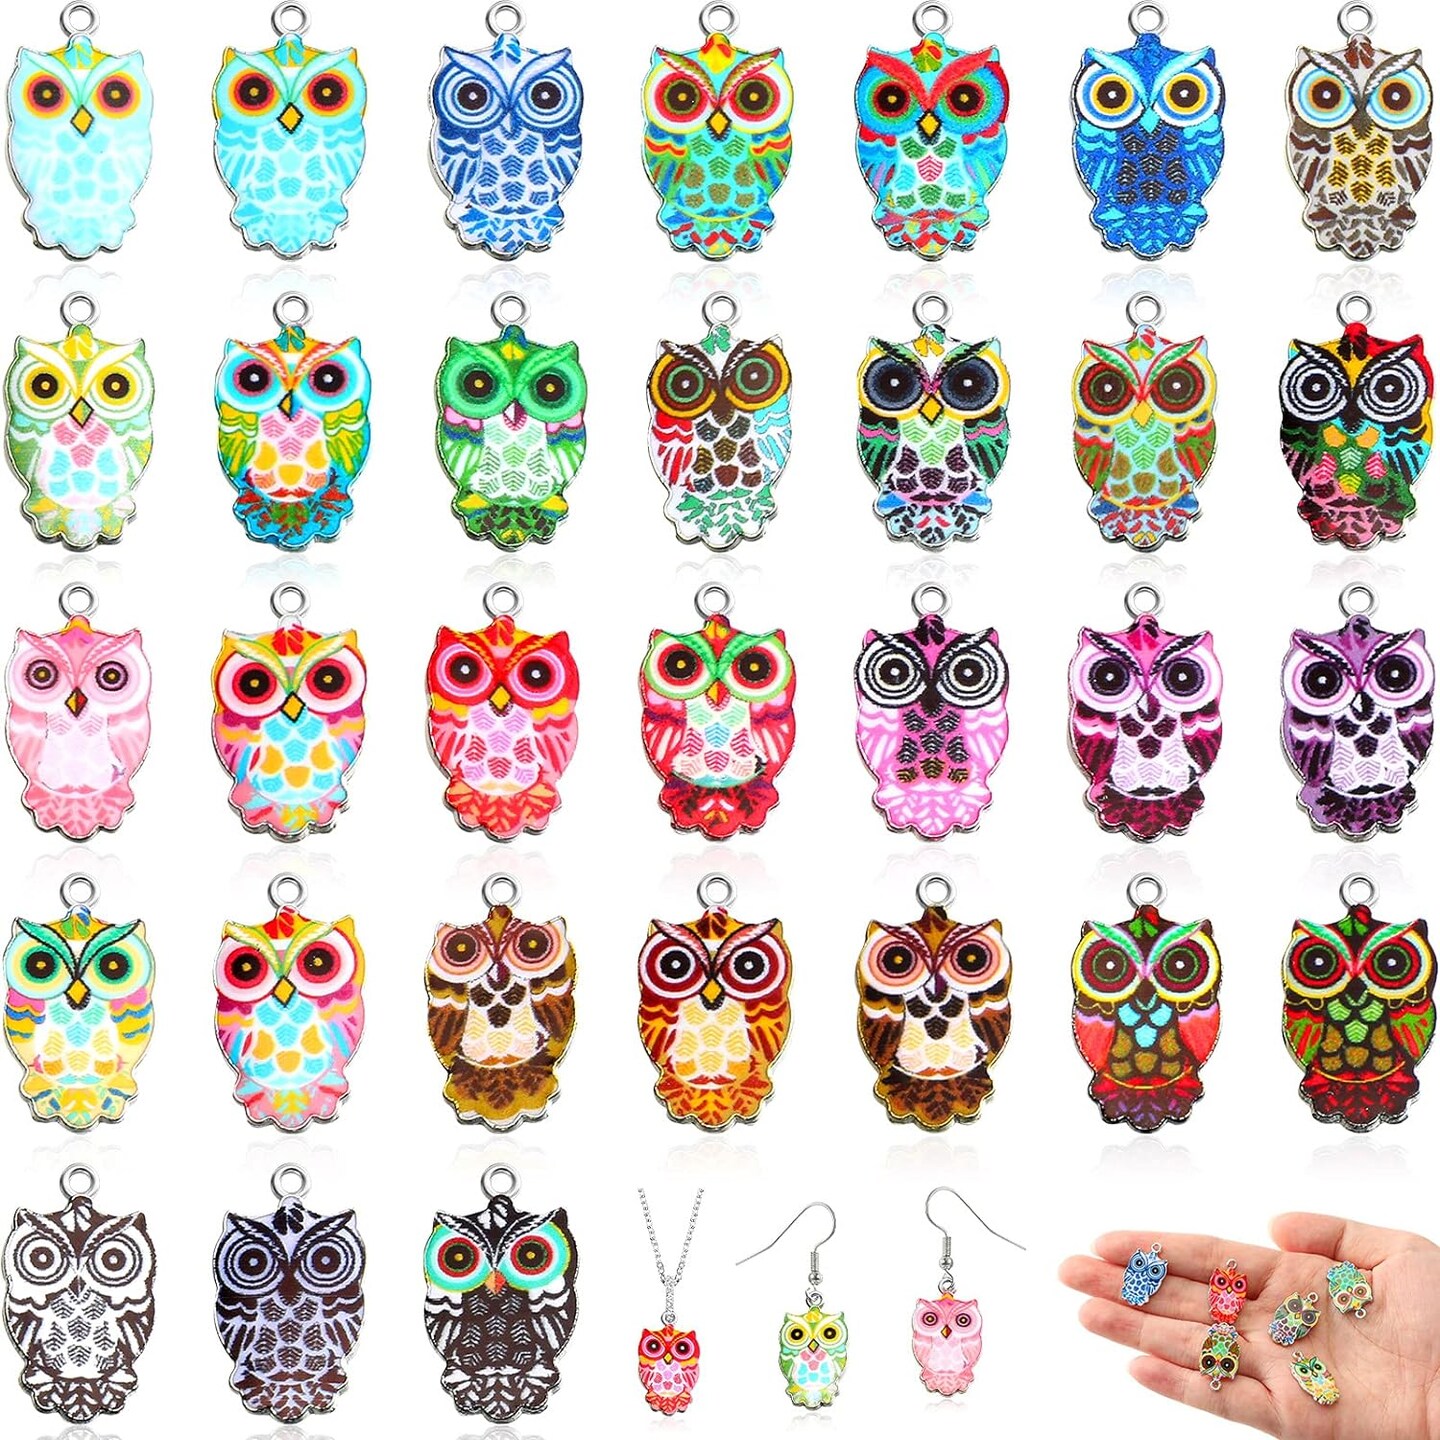 62 Pieces Halloween Owl Enamel Charms for Jewelry Making Colorful Owl Charms Pendant DIY Owl Charms Pendant Crafting Accessories for Earrings Necklaces Bracelets, 31 Colors